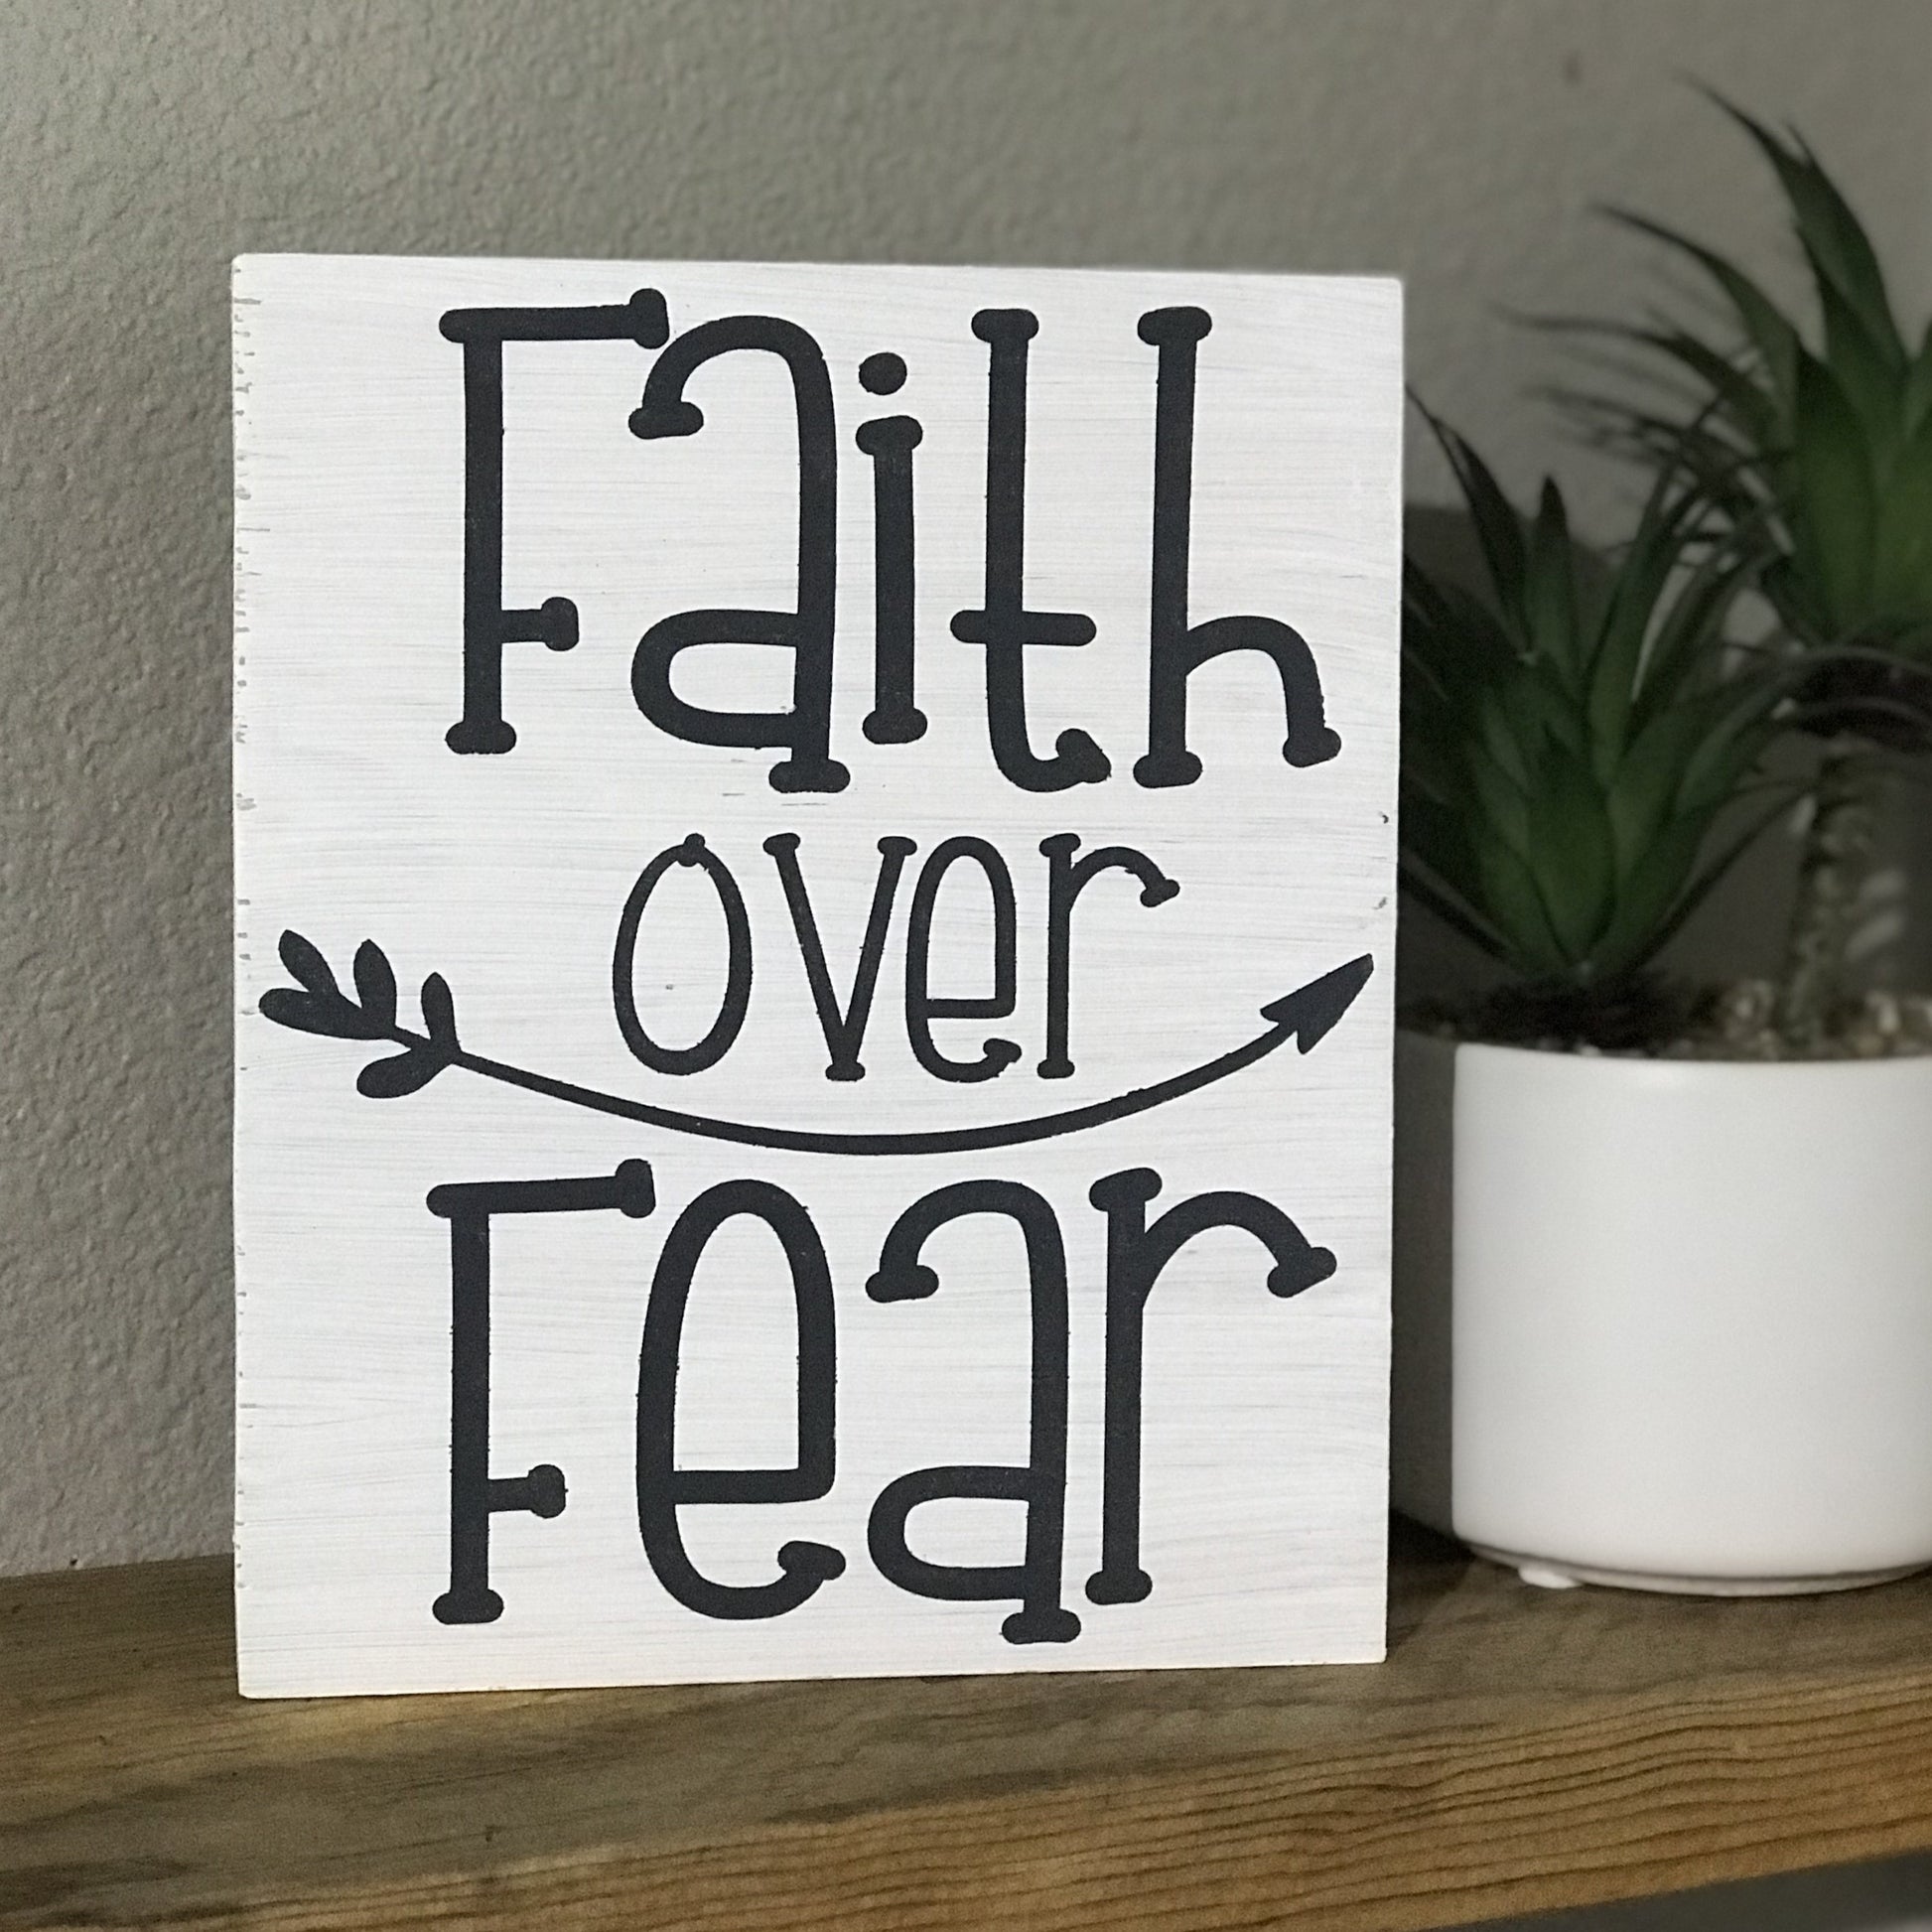 Measures approx. 7 1/4 inch x 6 inch Background painted in white  Saying "Faith over Fear" in gray